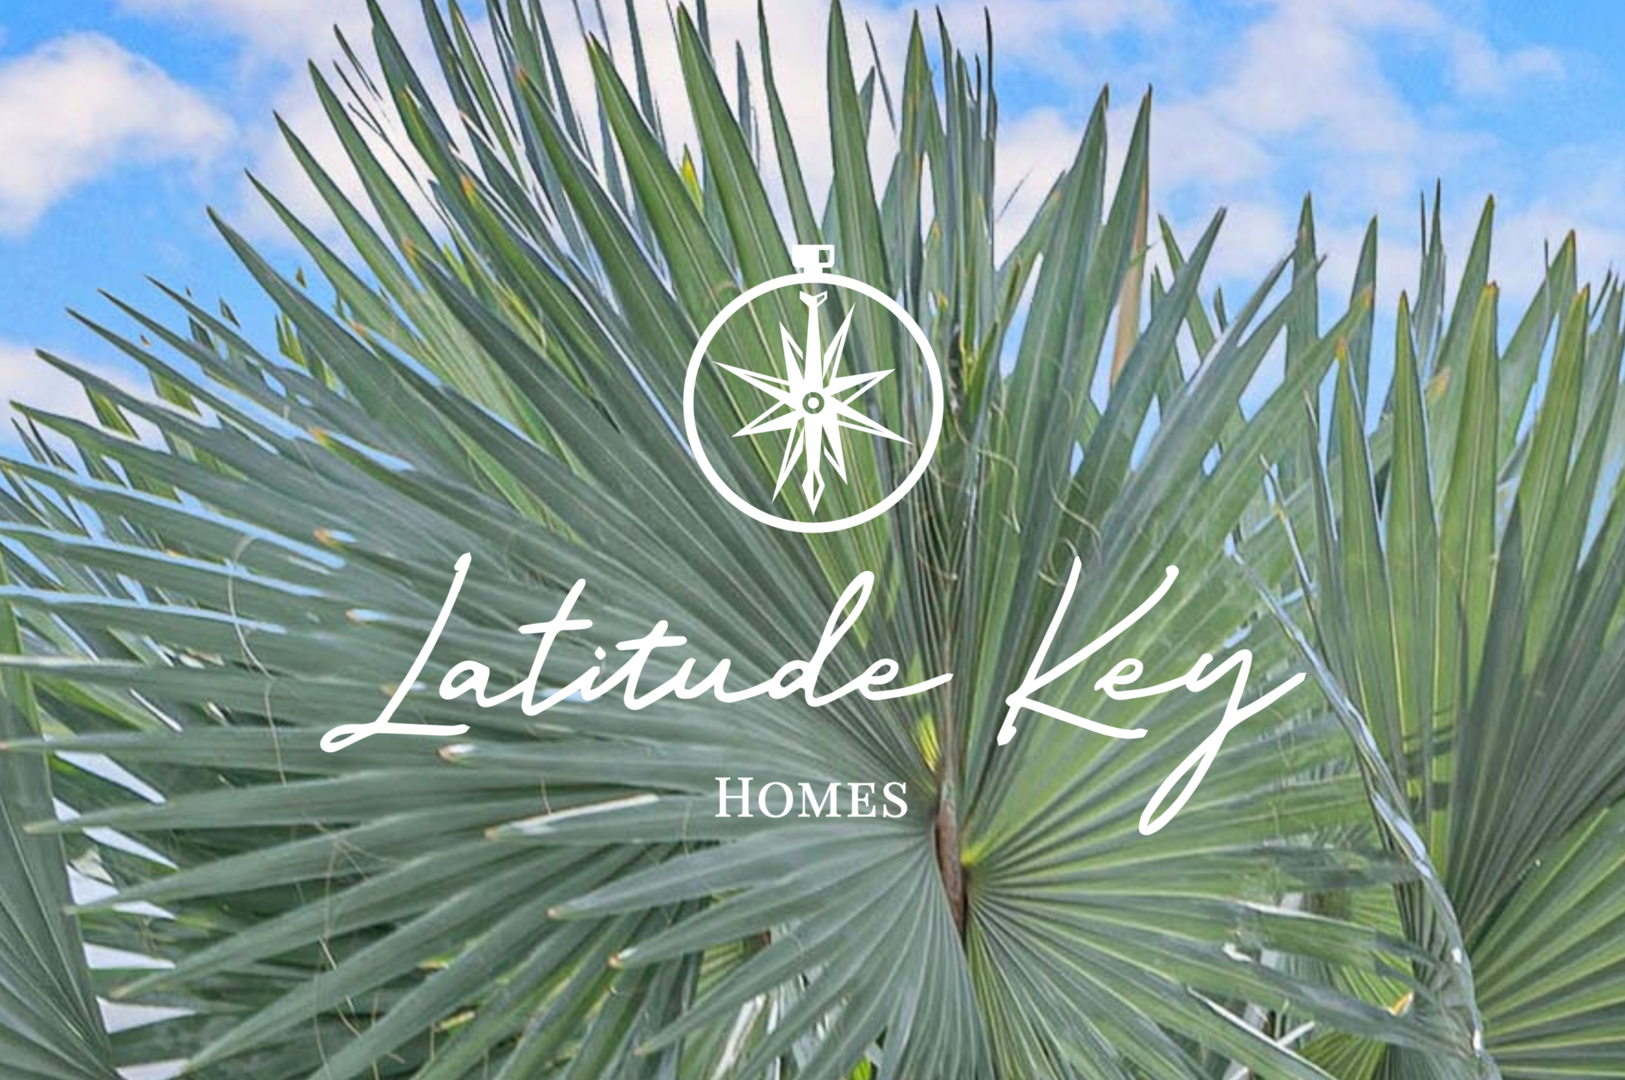 Part of the Homes collection by Latitude Key.